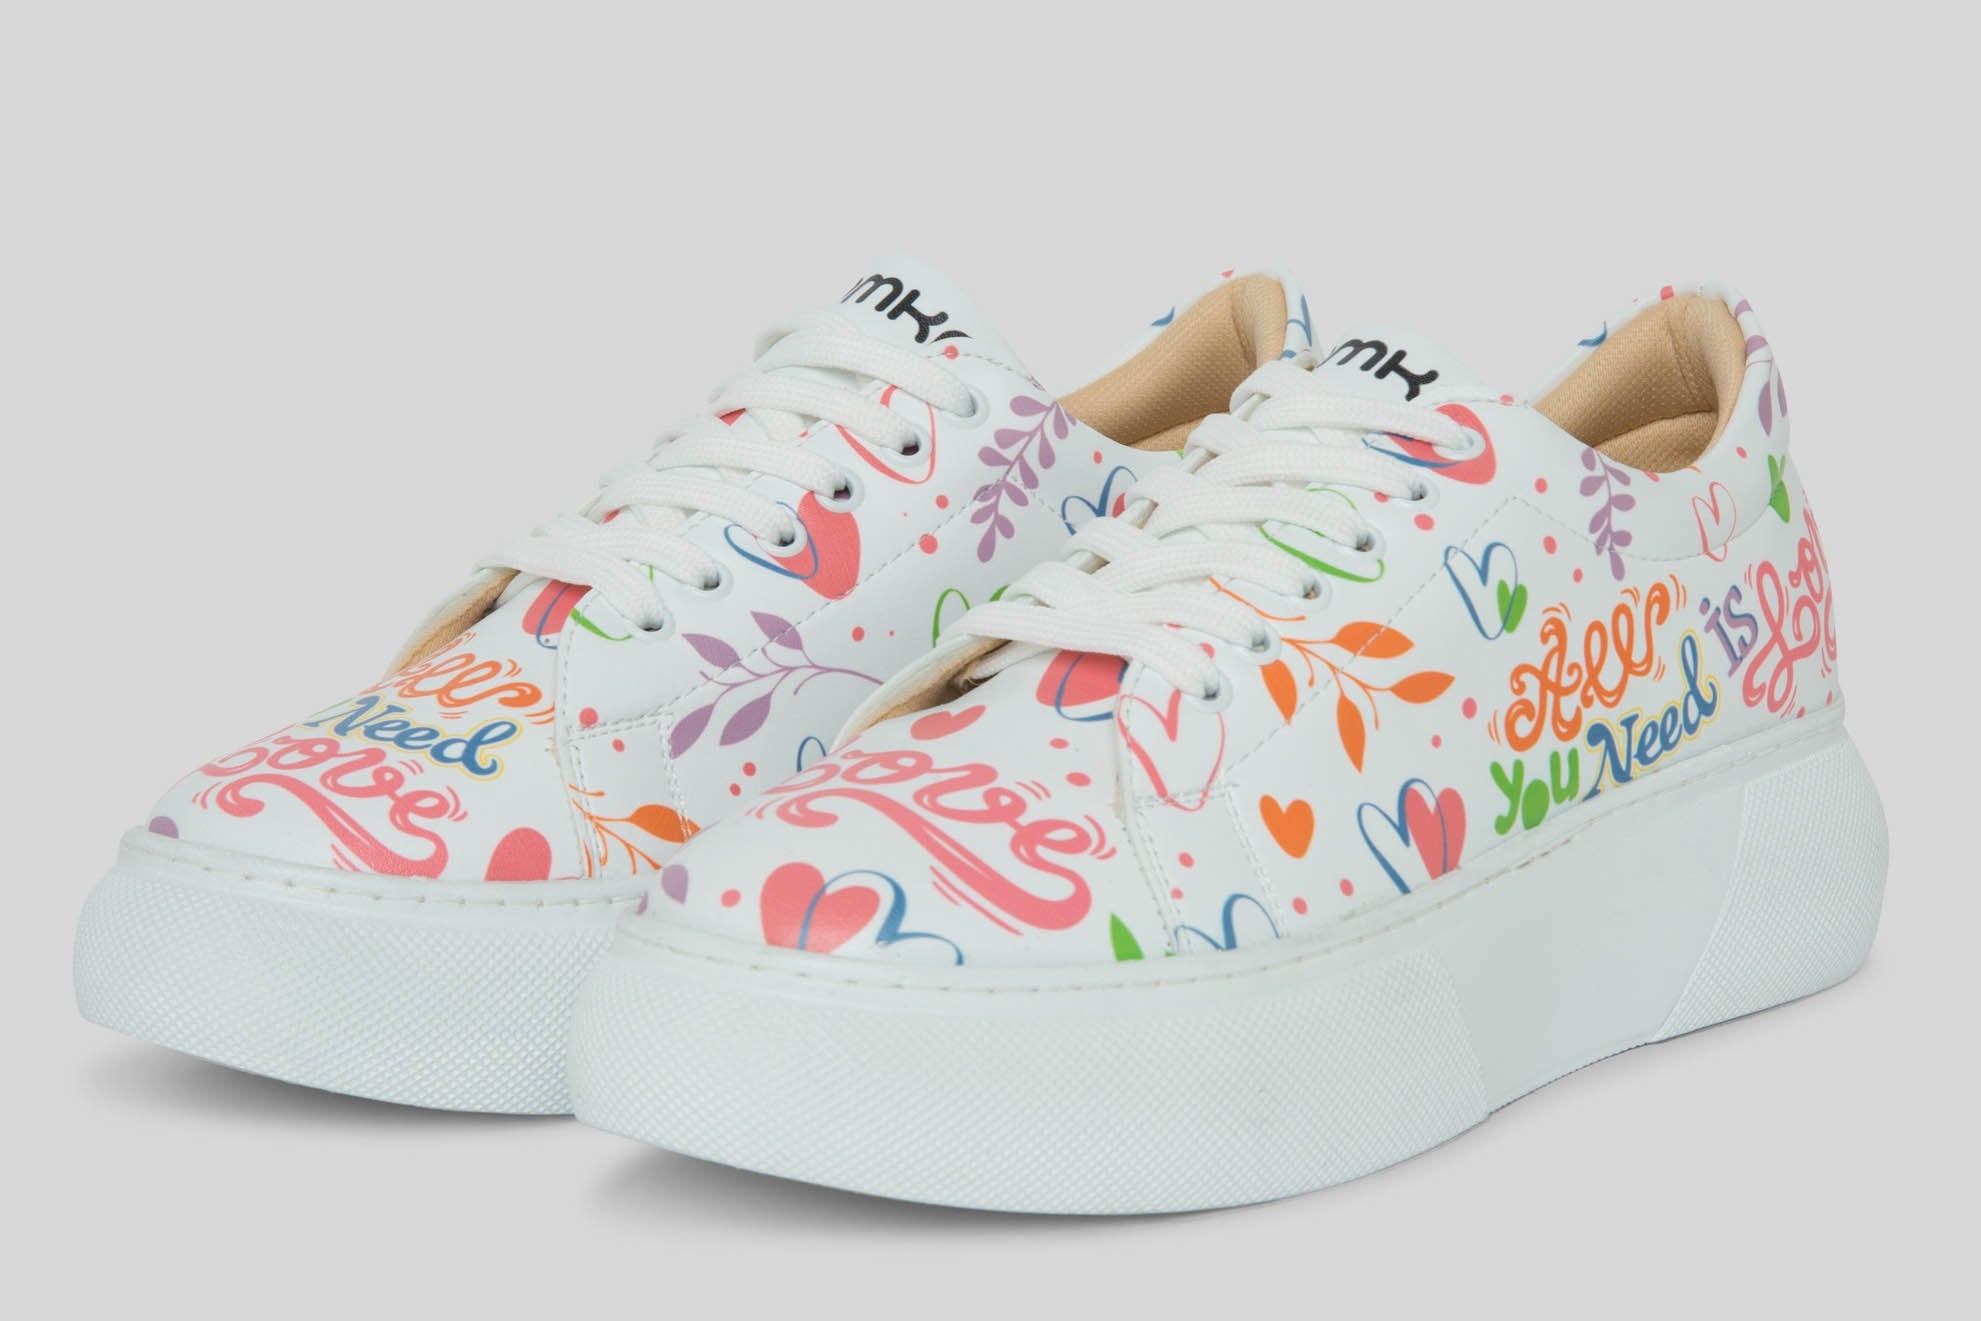 All you Need is Love Sneakers BY Mumka - Sneakers available at DOYUF